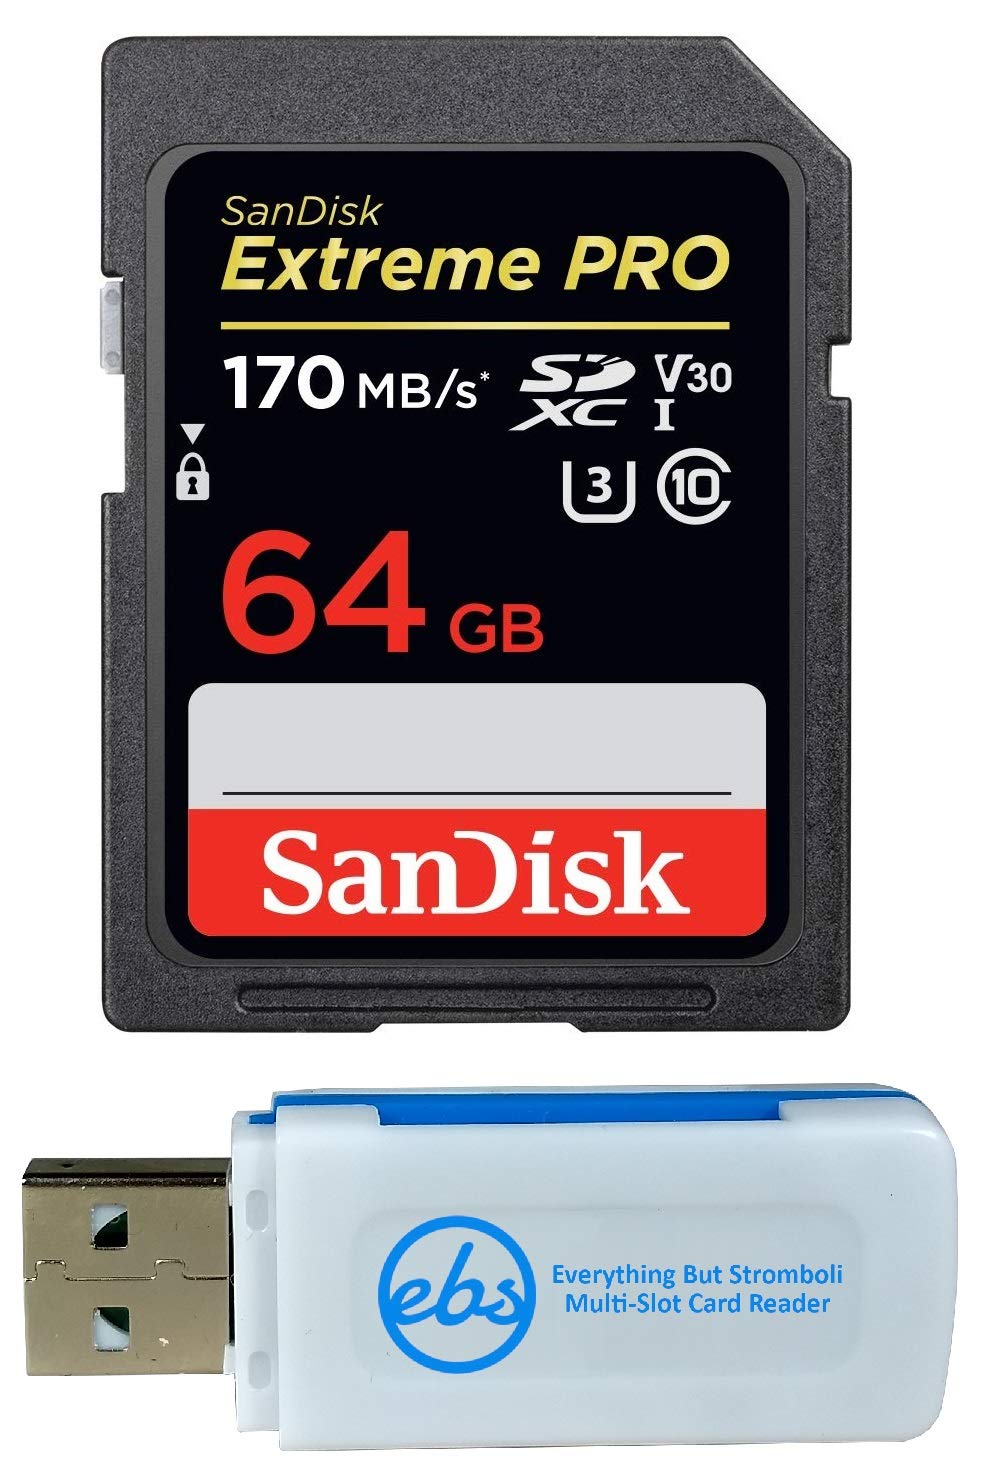 Book Cover SanDisk 64GB Extreme Pro Memory Card works with Olympus TG-5 Waterproof, E-M10 Mark II, E-M1, STYLUS Tough TG-4, TG-870 Digital DSLR Camera SDXC 4K V30 UHS-I with Everything But Stromboli Combo Reader